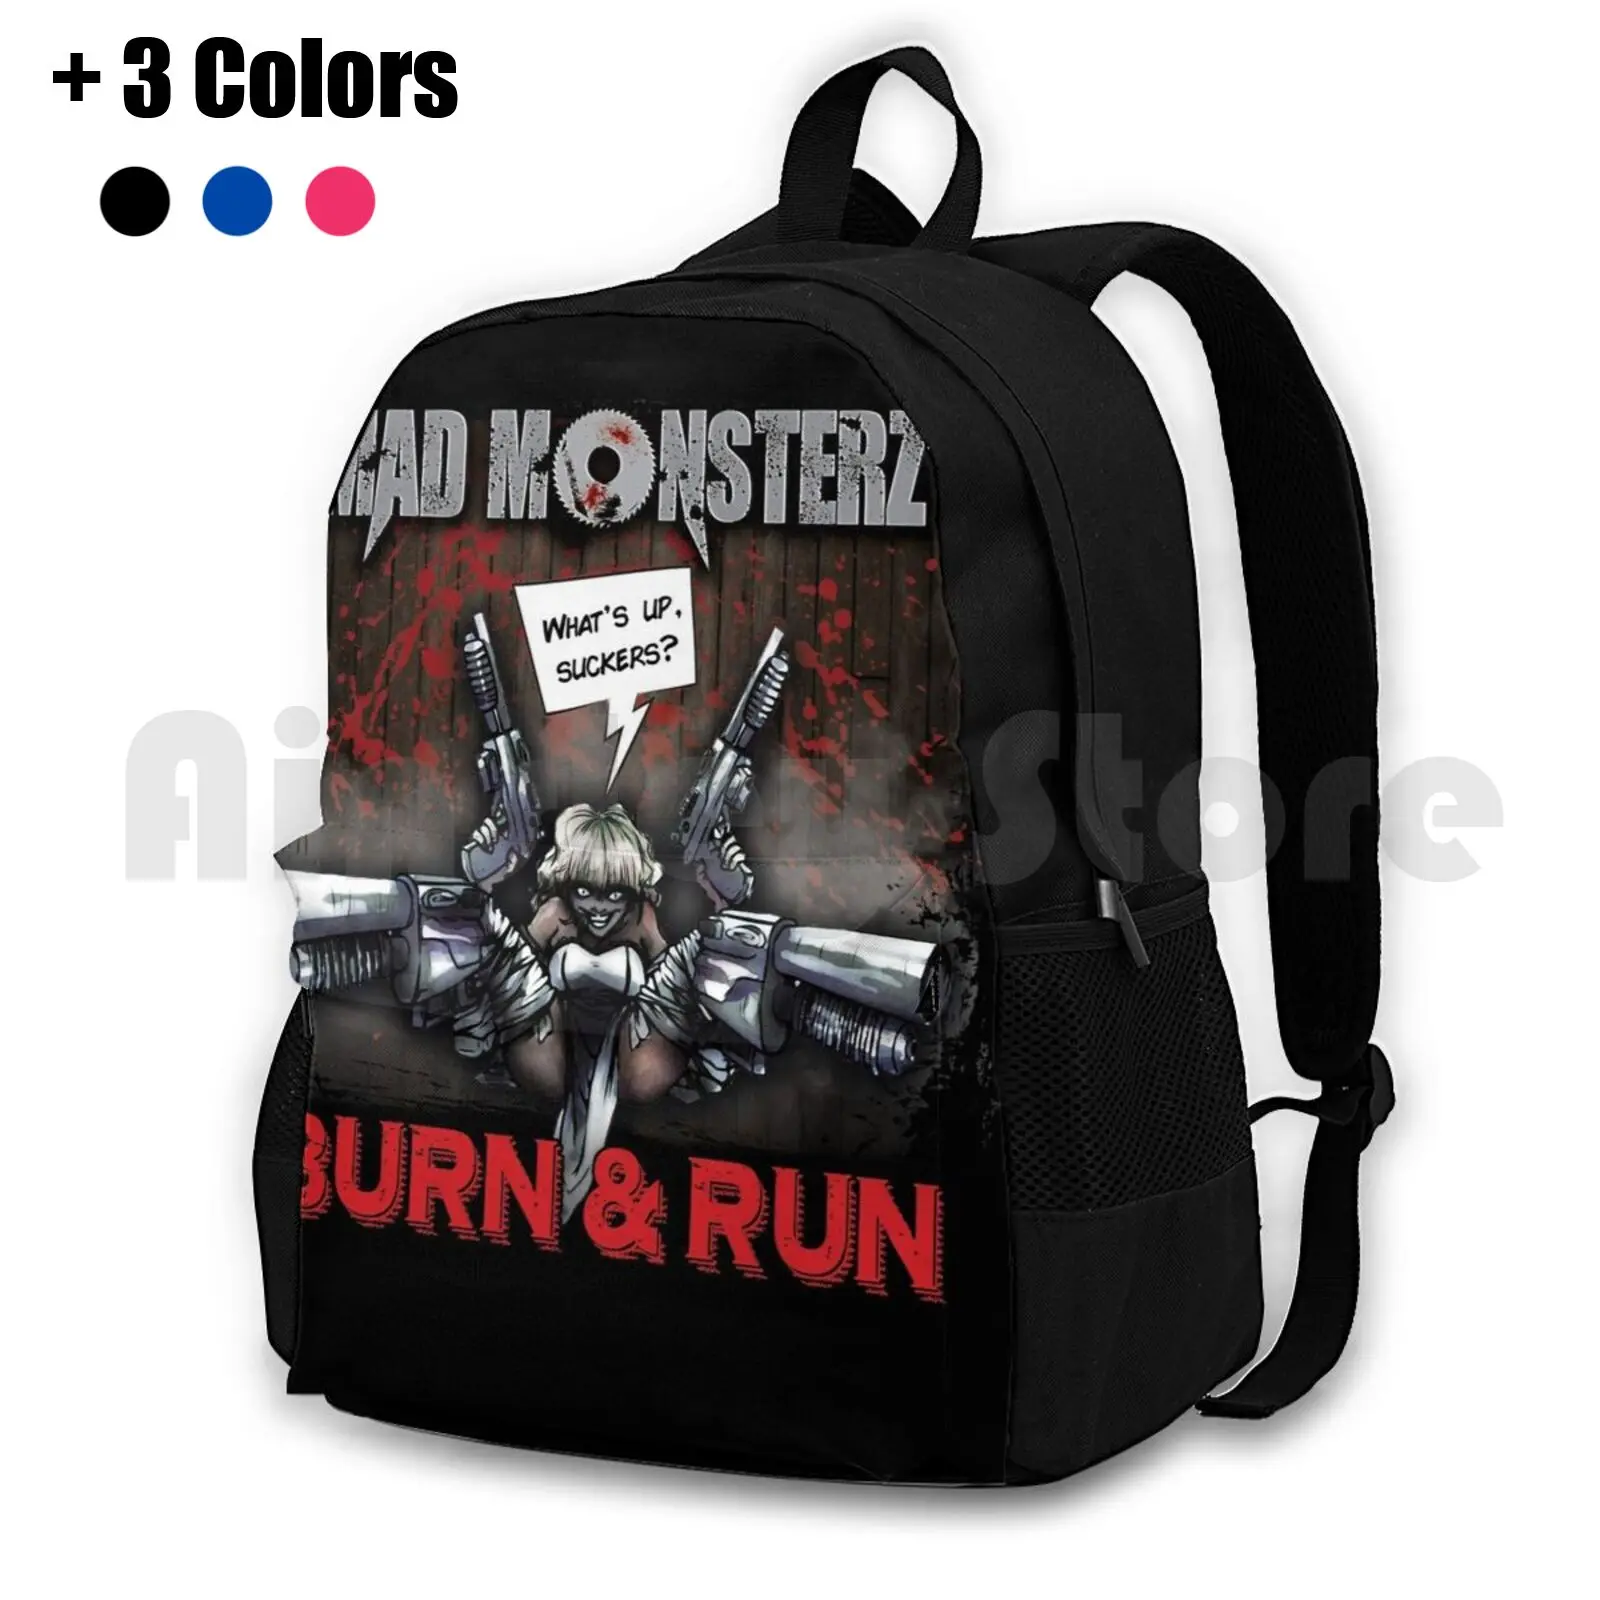 

Mad Monsterz Burn & Run Cd Cover Outdoor Hiking Backpack Riding Climbing Sports Bag Monster Fun Black Red Artist Collective